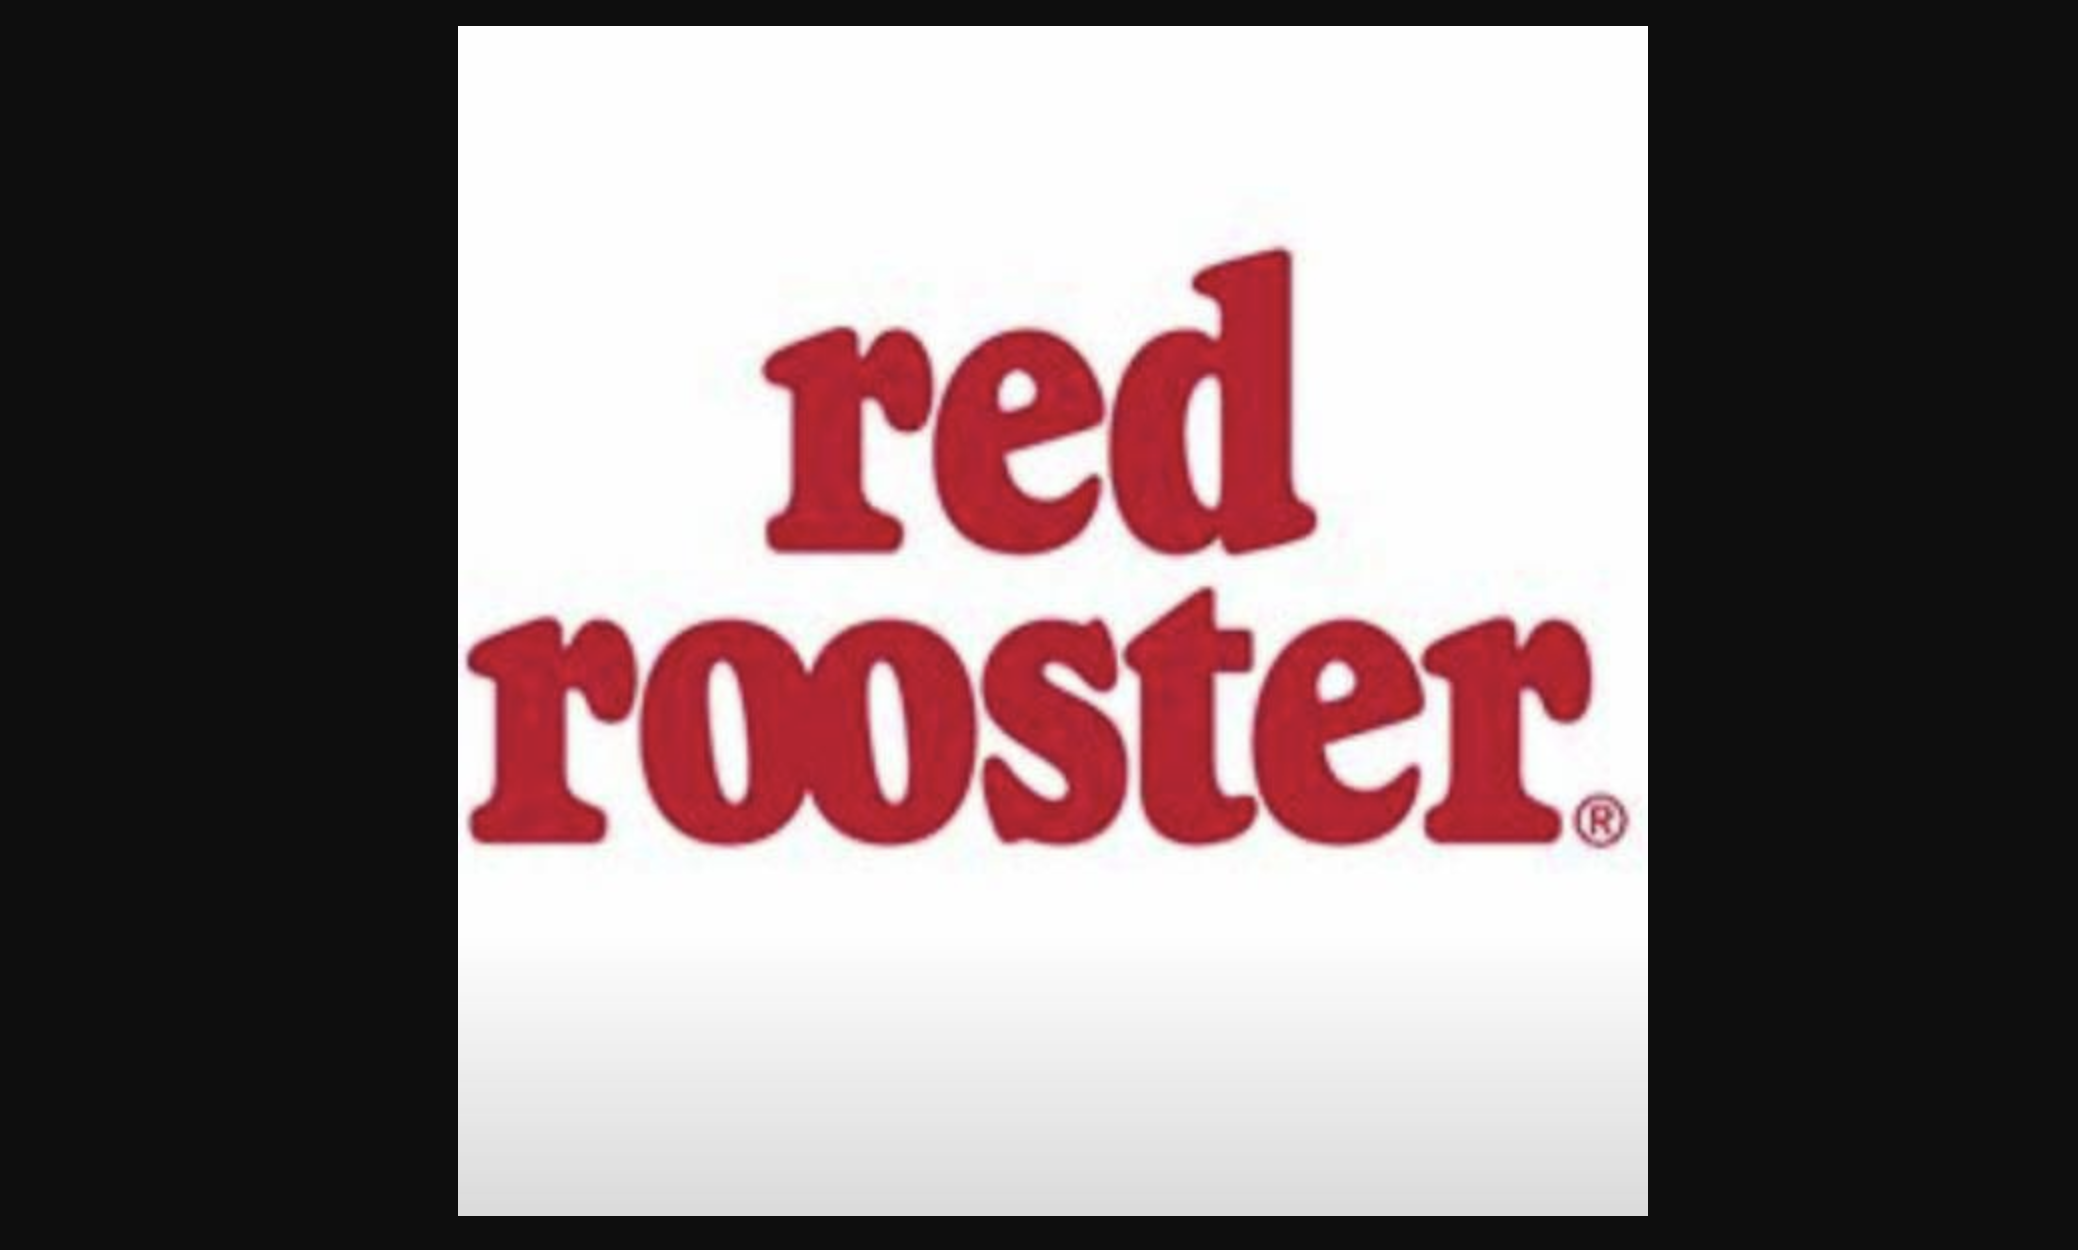 'Defamatory' Red Rooster ad cleared of vilifying florists